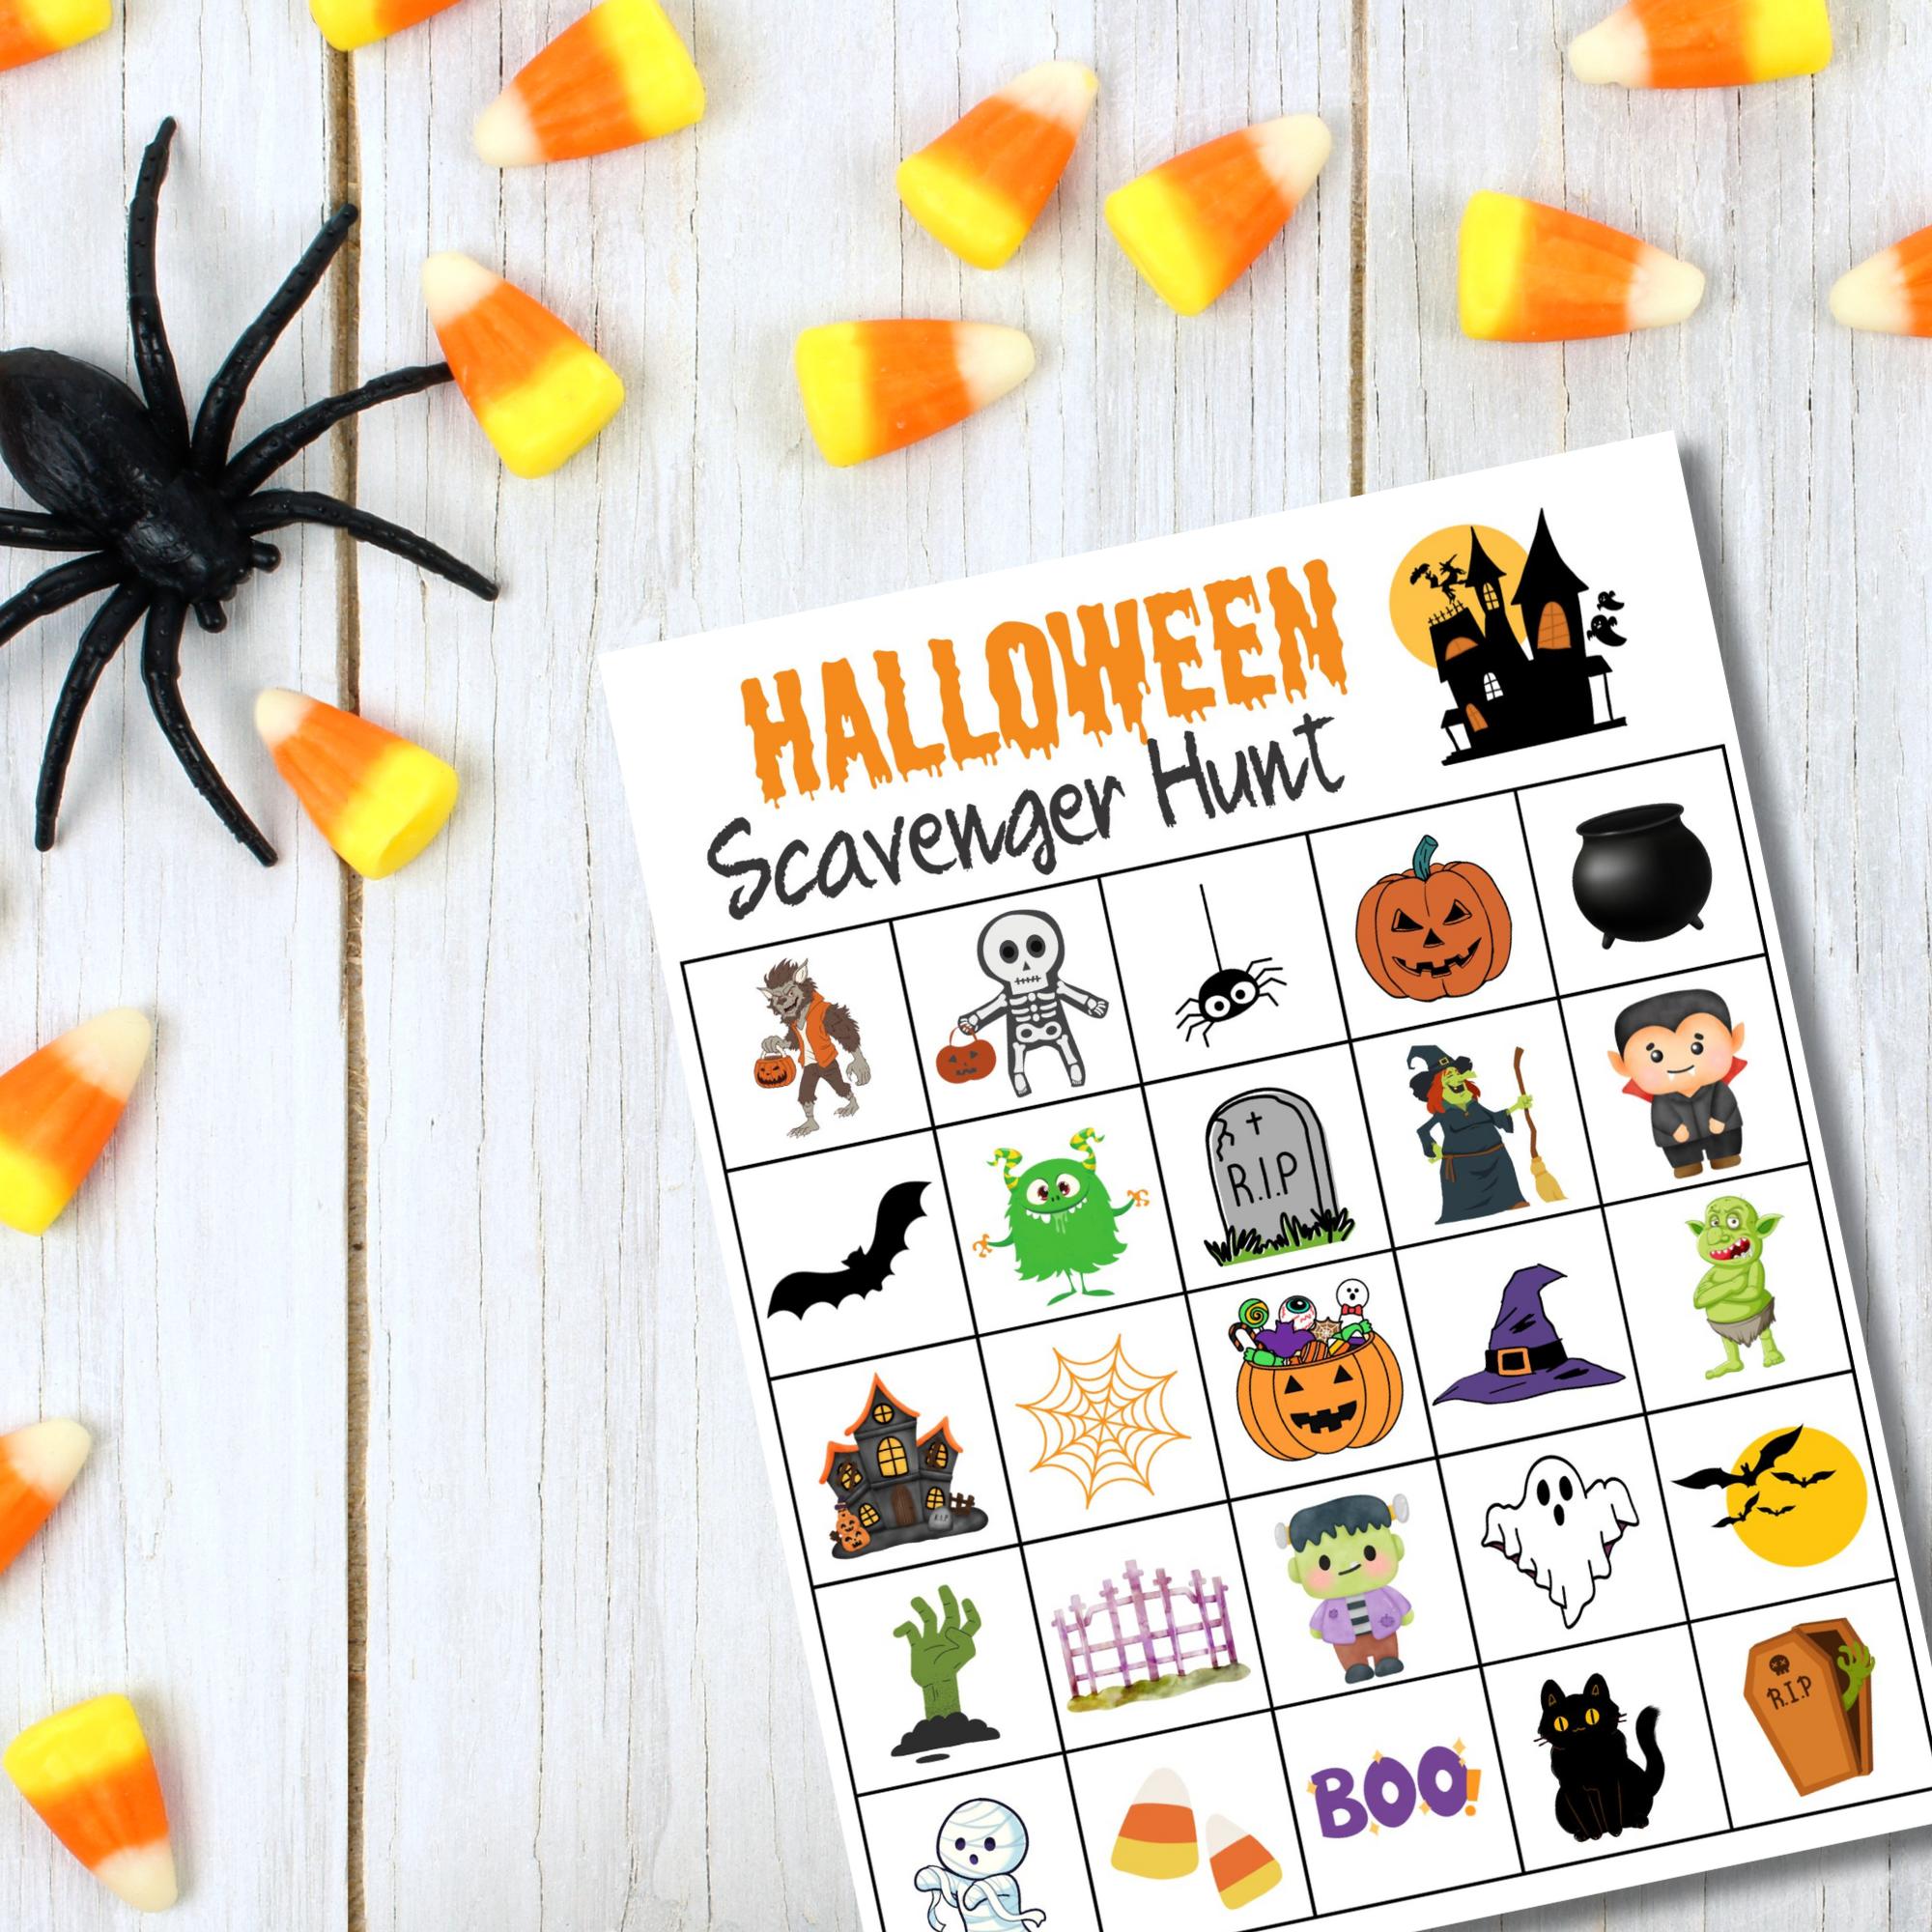 Halloween Scavenger Hunt Printable: Free Spooky Fun - Made In A Pinch